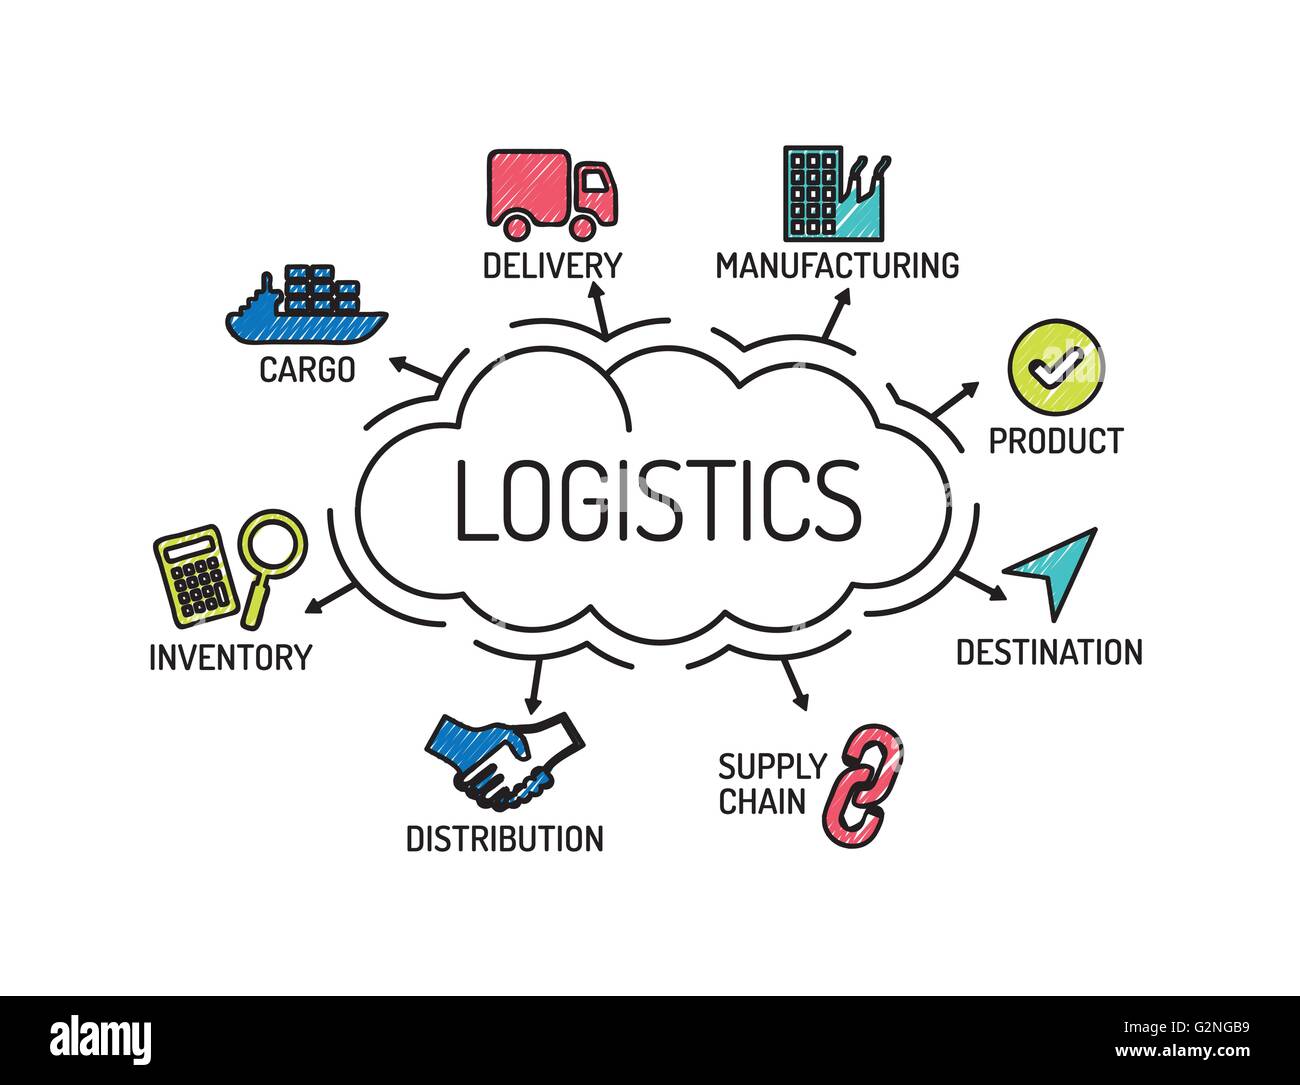 Logistics. Chart with keywords and icons. Sketch Stock Vector